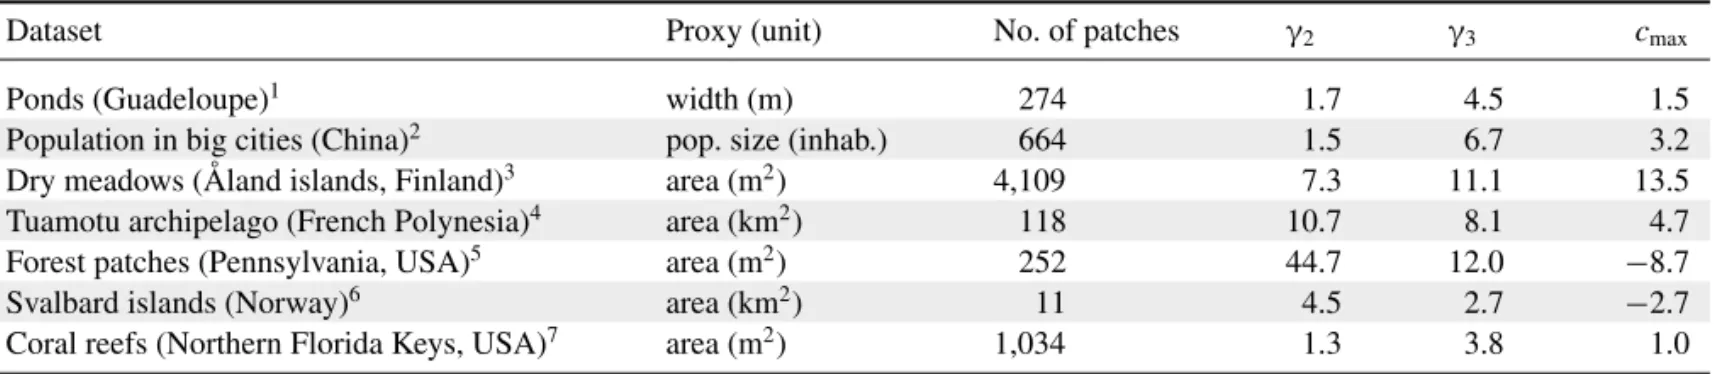 Table 1. Distributions of carrying capacity proxies in real datasets.